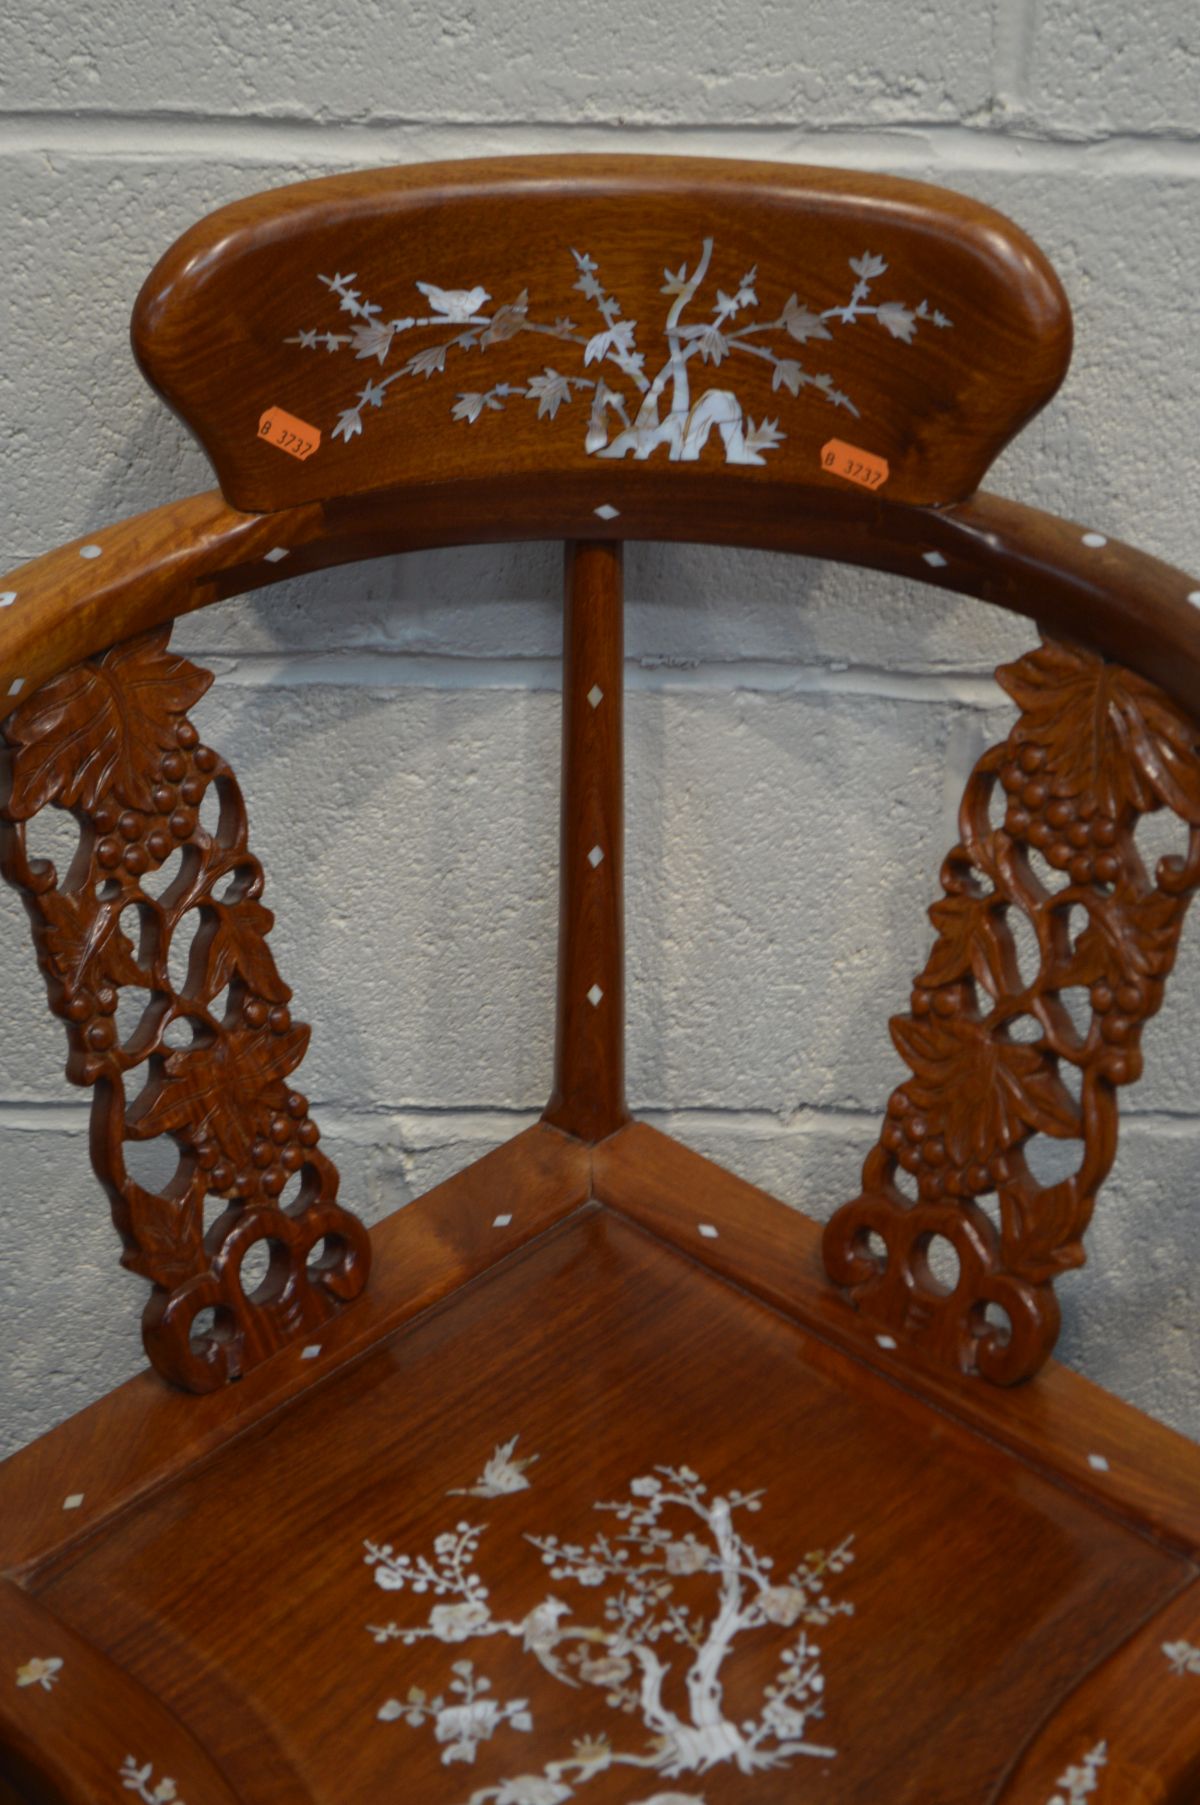 A NEAR PAIR OF MID TO LATE 20TH CENTURY ORIENTAL HARDWOOD CORNER CHAIRS, with mother of pearl - Image 6 of 7